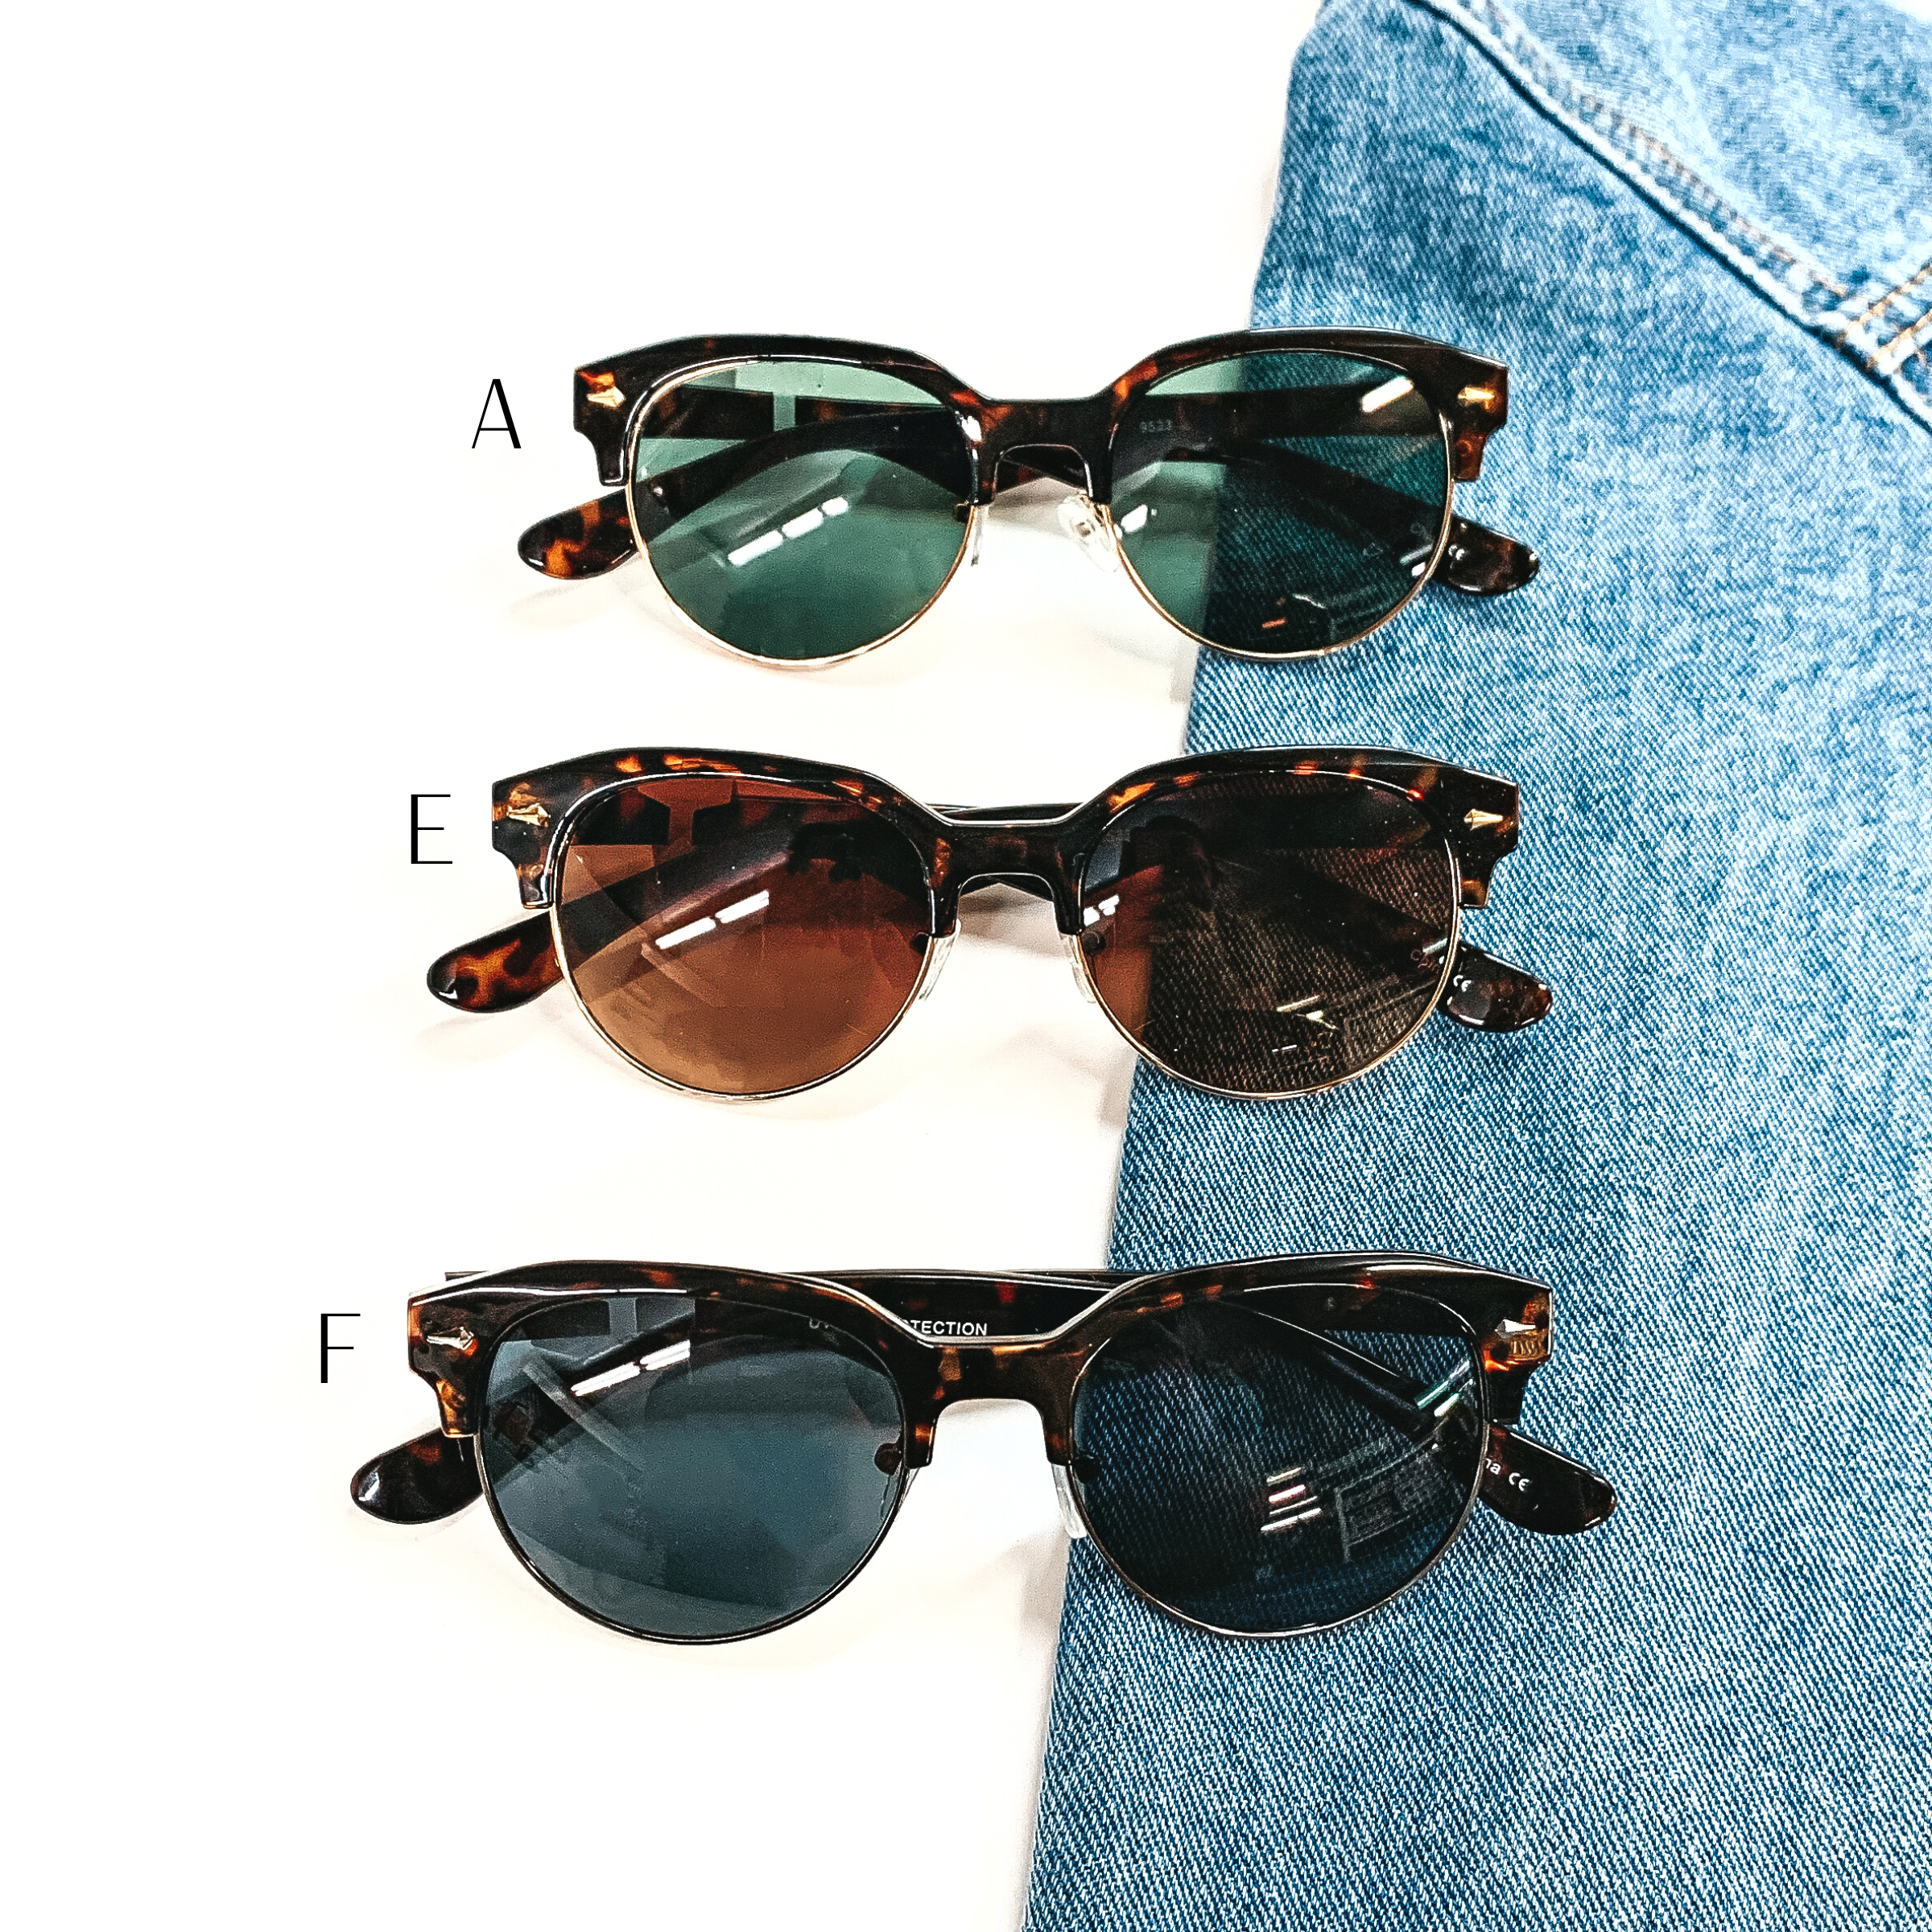 There are three pairs of browline style sunglasses in tortouise print for the frame  and different colors of lenses. Style A has a tortouise print frame, dark green  lense with a gold tone outline. Style E has a tortuoise print frame, brown lense with a  gold tone outline. Style F has a tortouise print frame with a black/dark grey lense  with a gunmetal/black outline. These three pairs of sunglasses are taken on a white  background and on a jean jacket sleeve.